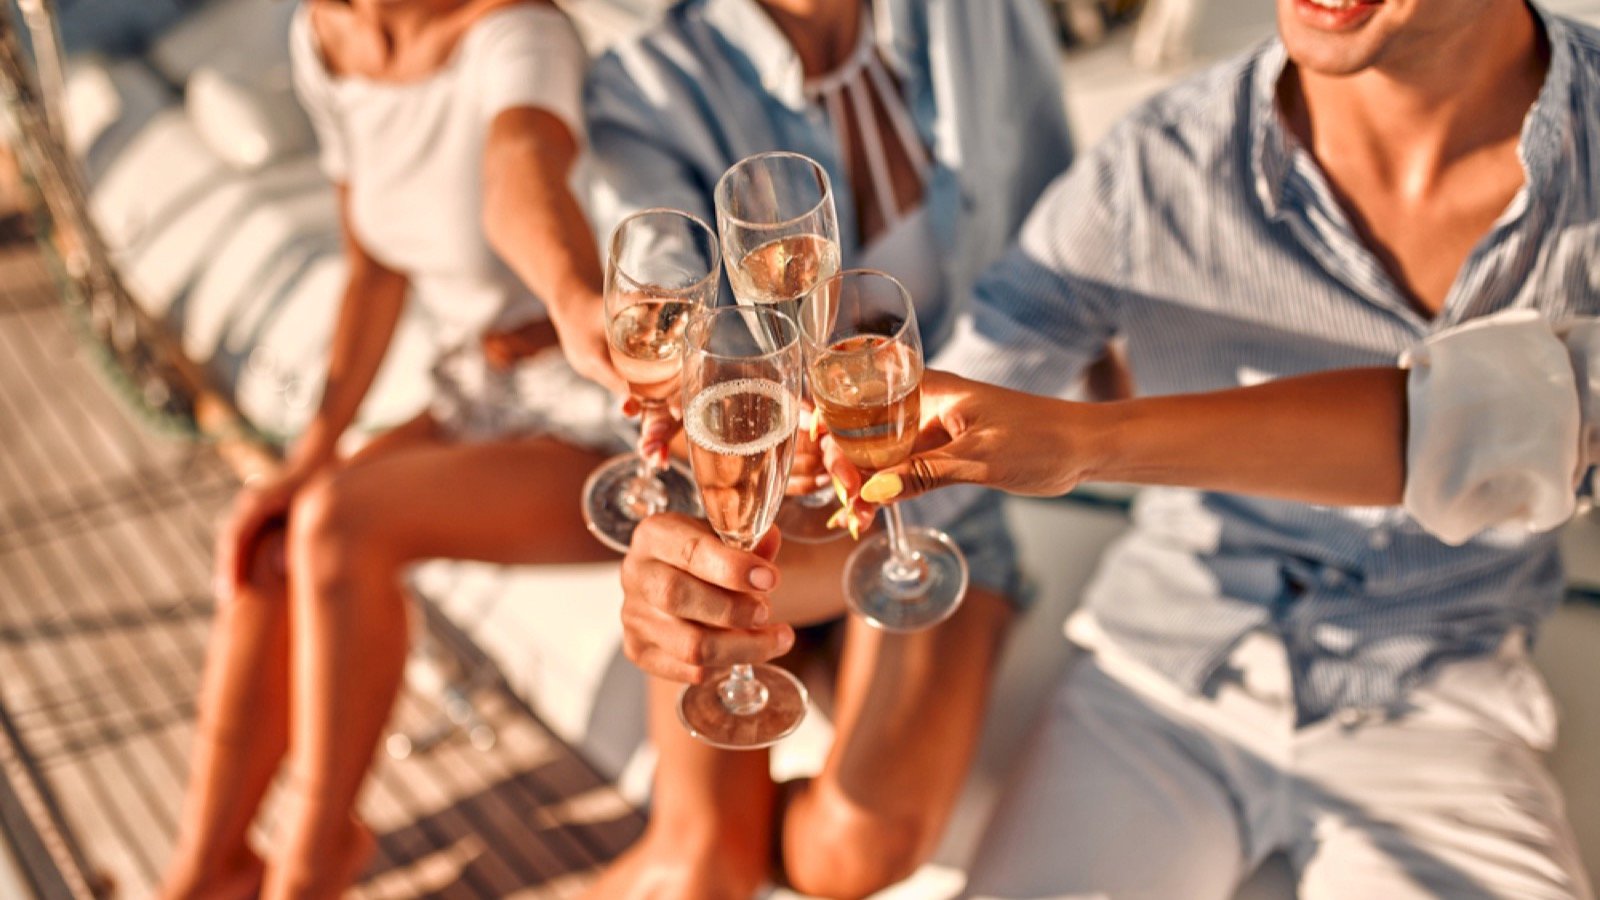 <p>Embark on a 200-day maritime adventure aboard Oceania Insignia for $411,198 per guest. This journey is not just about length but luxury, with a $9,200 excursion credit and endless champagne, wine, and gourmet meals. Enjoy the comfort of a 1,000-square-foot suite, complete with cashmere blankets and a 24-hour butler, alongside exclusive access to the Aquamar Spa terrace.</p>